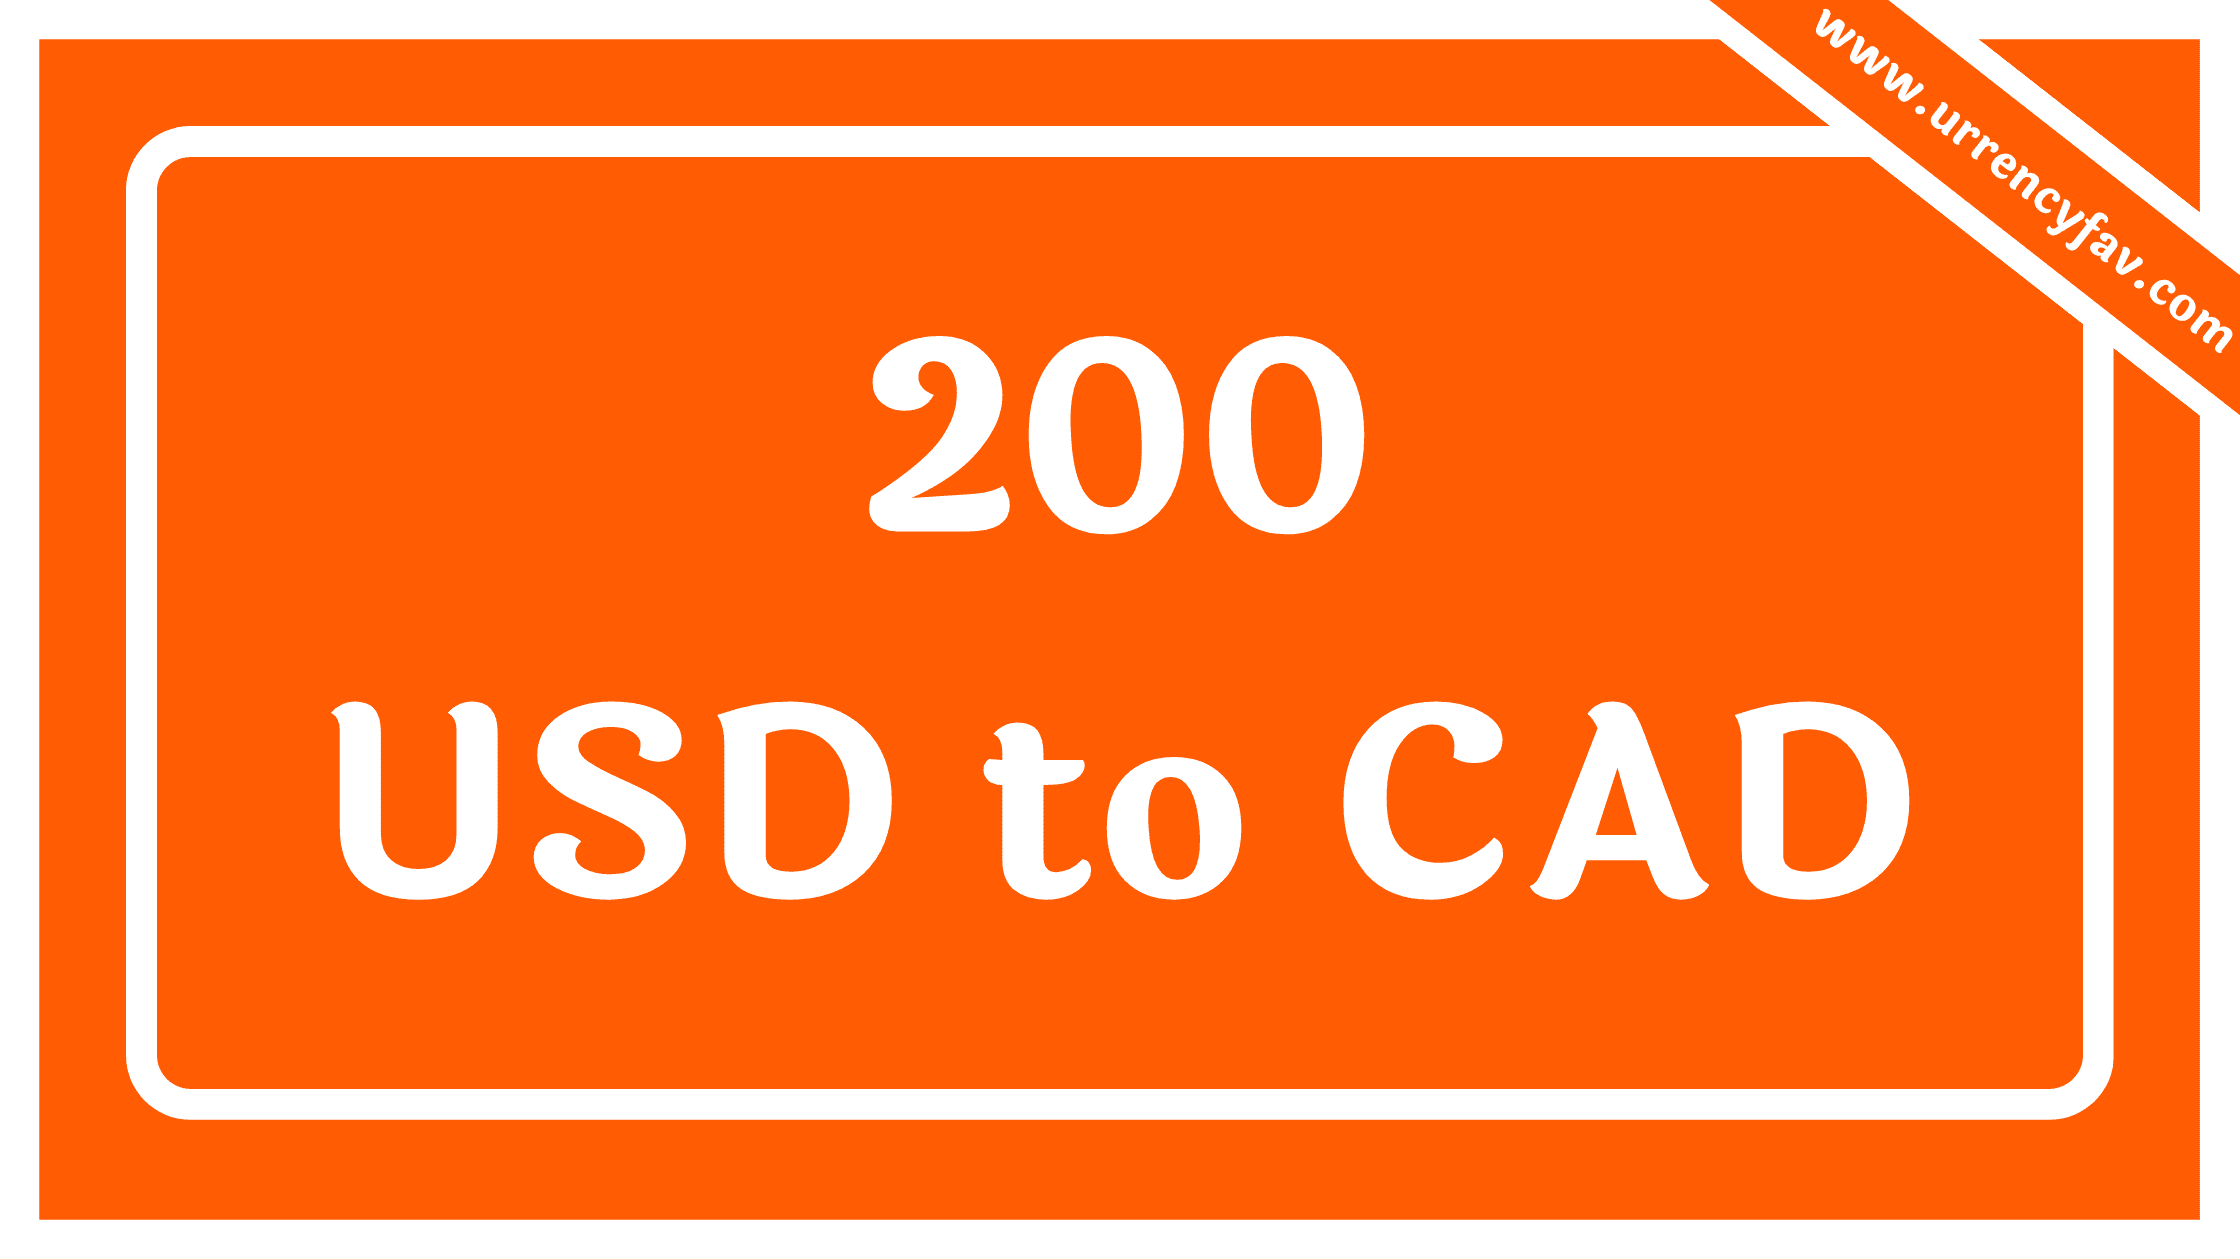 200 USD to CAD